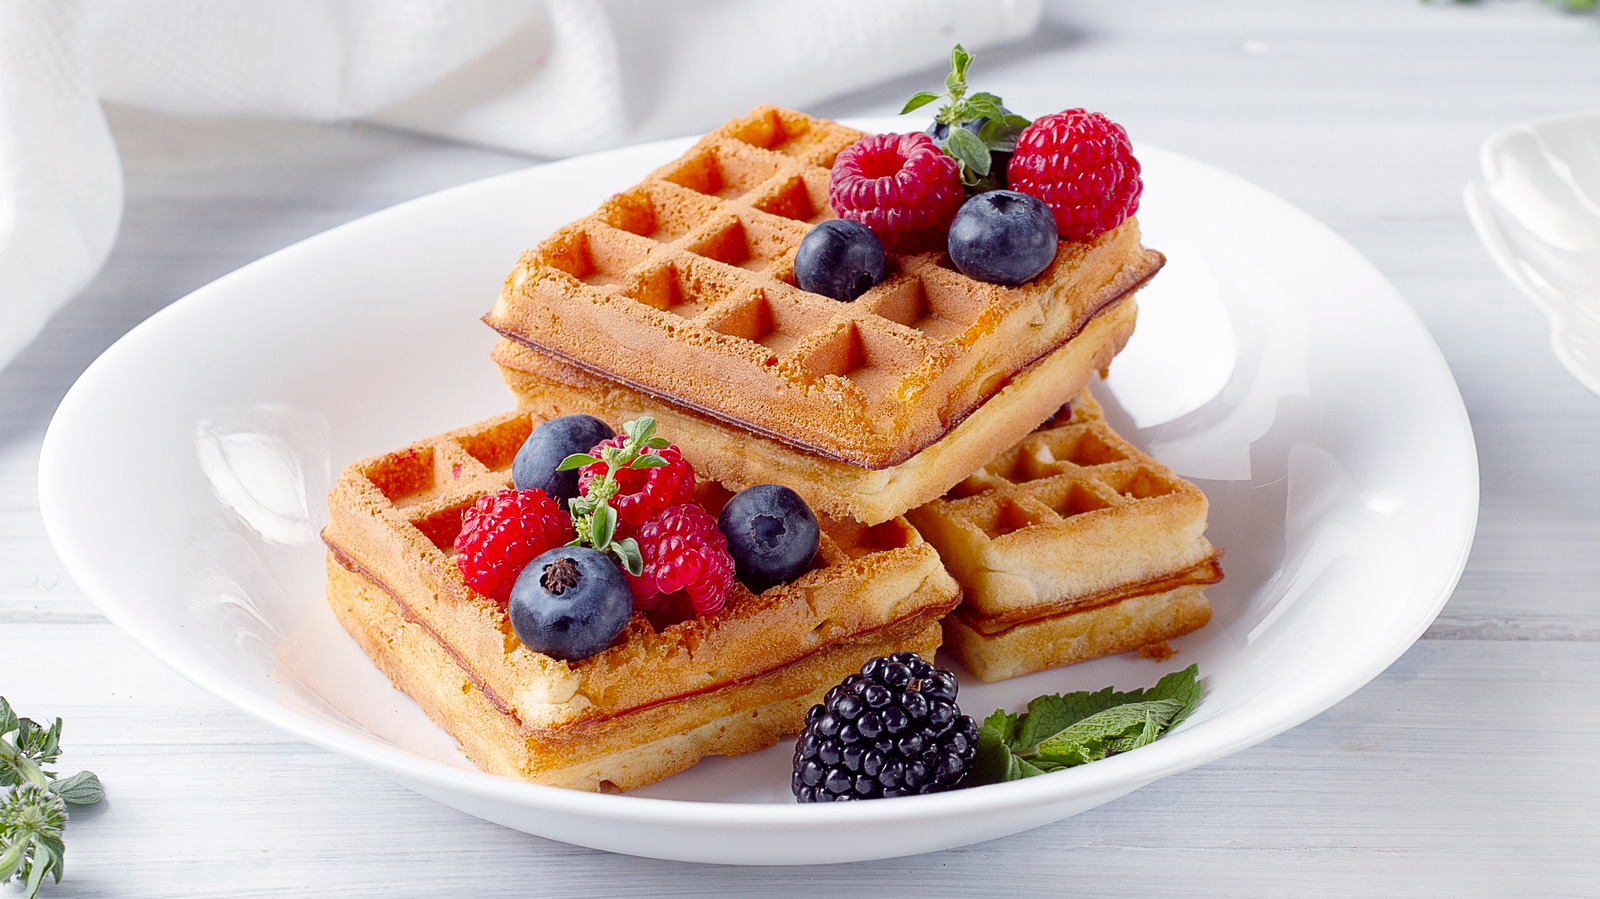 What's The Difference Between Regular Waffles And Belgian Waffles?